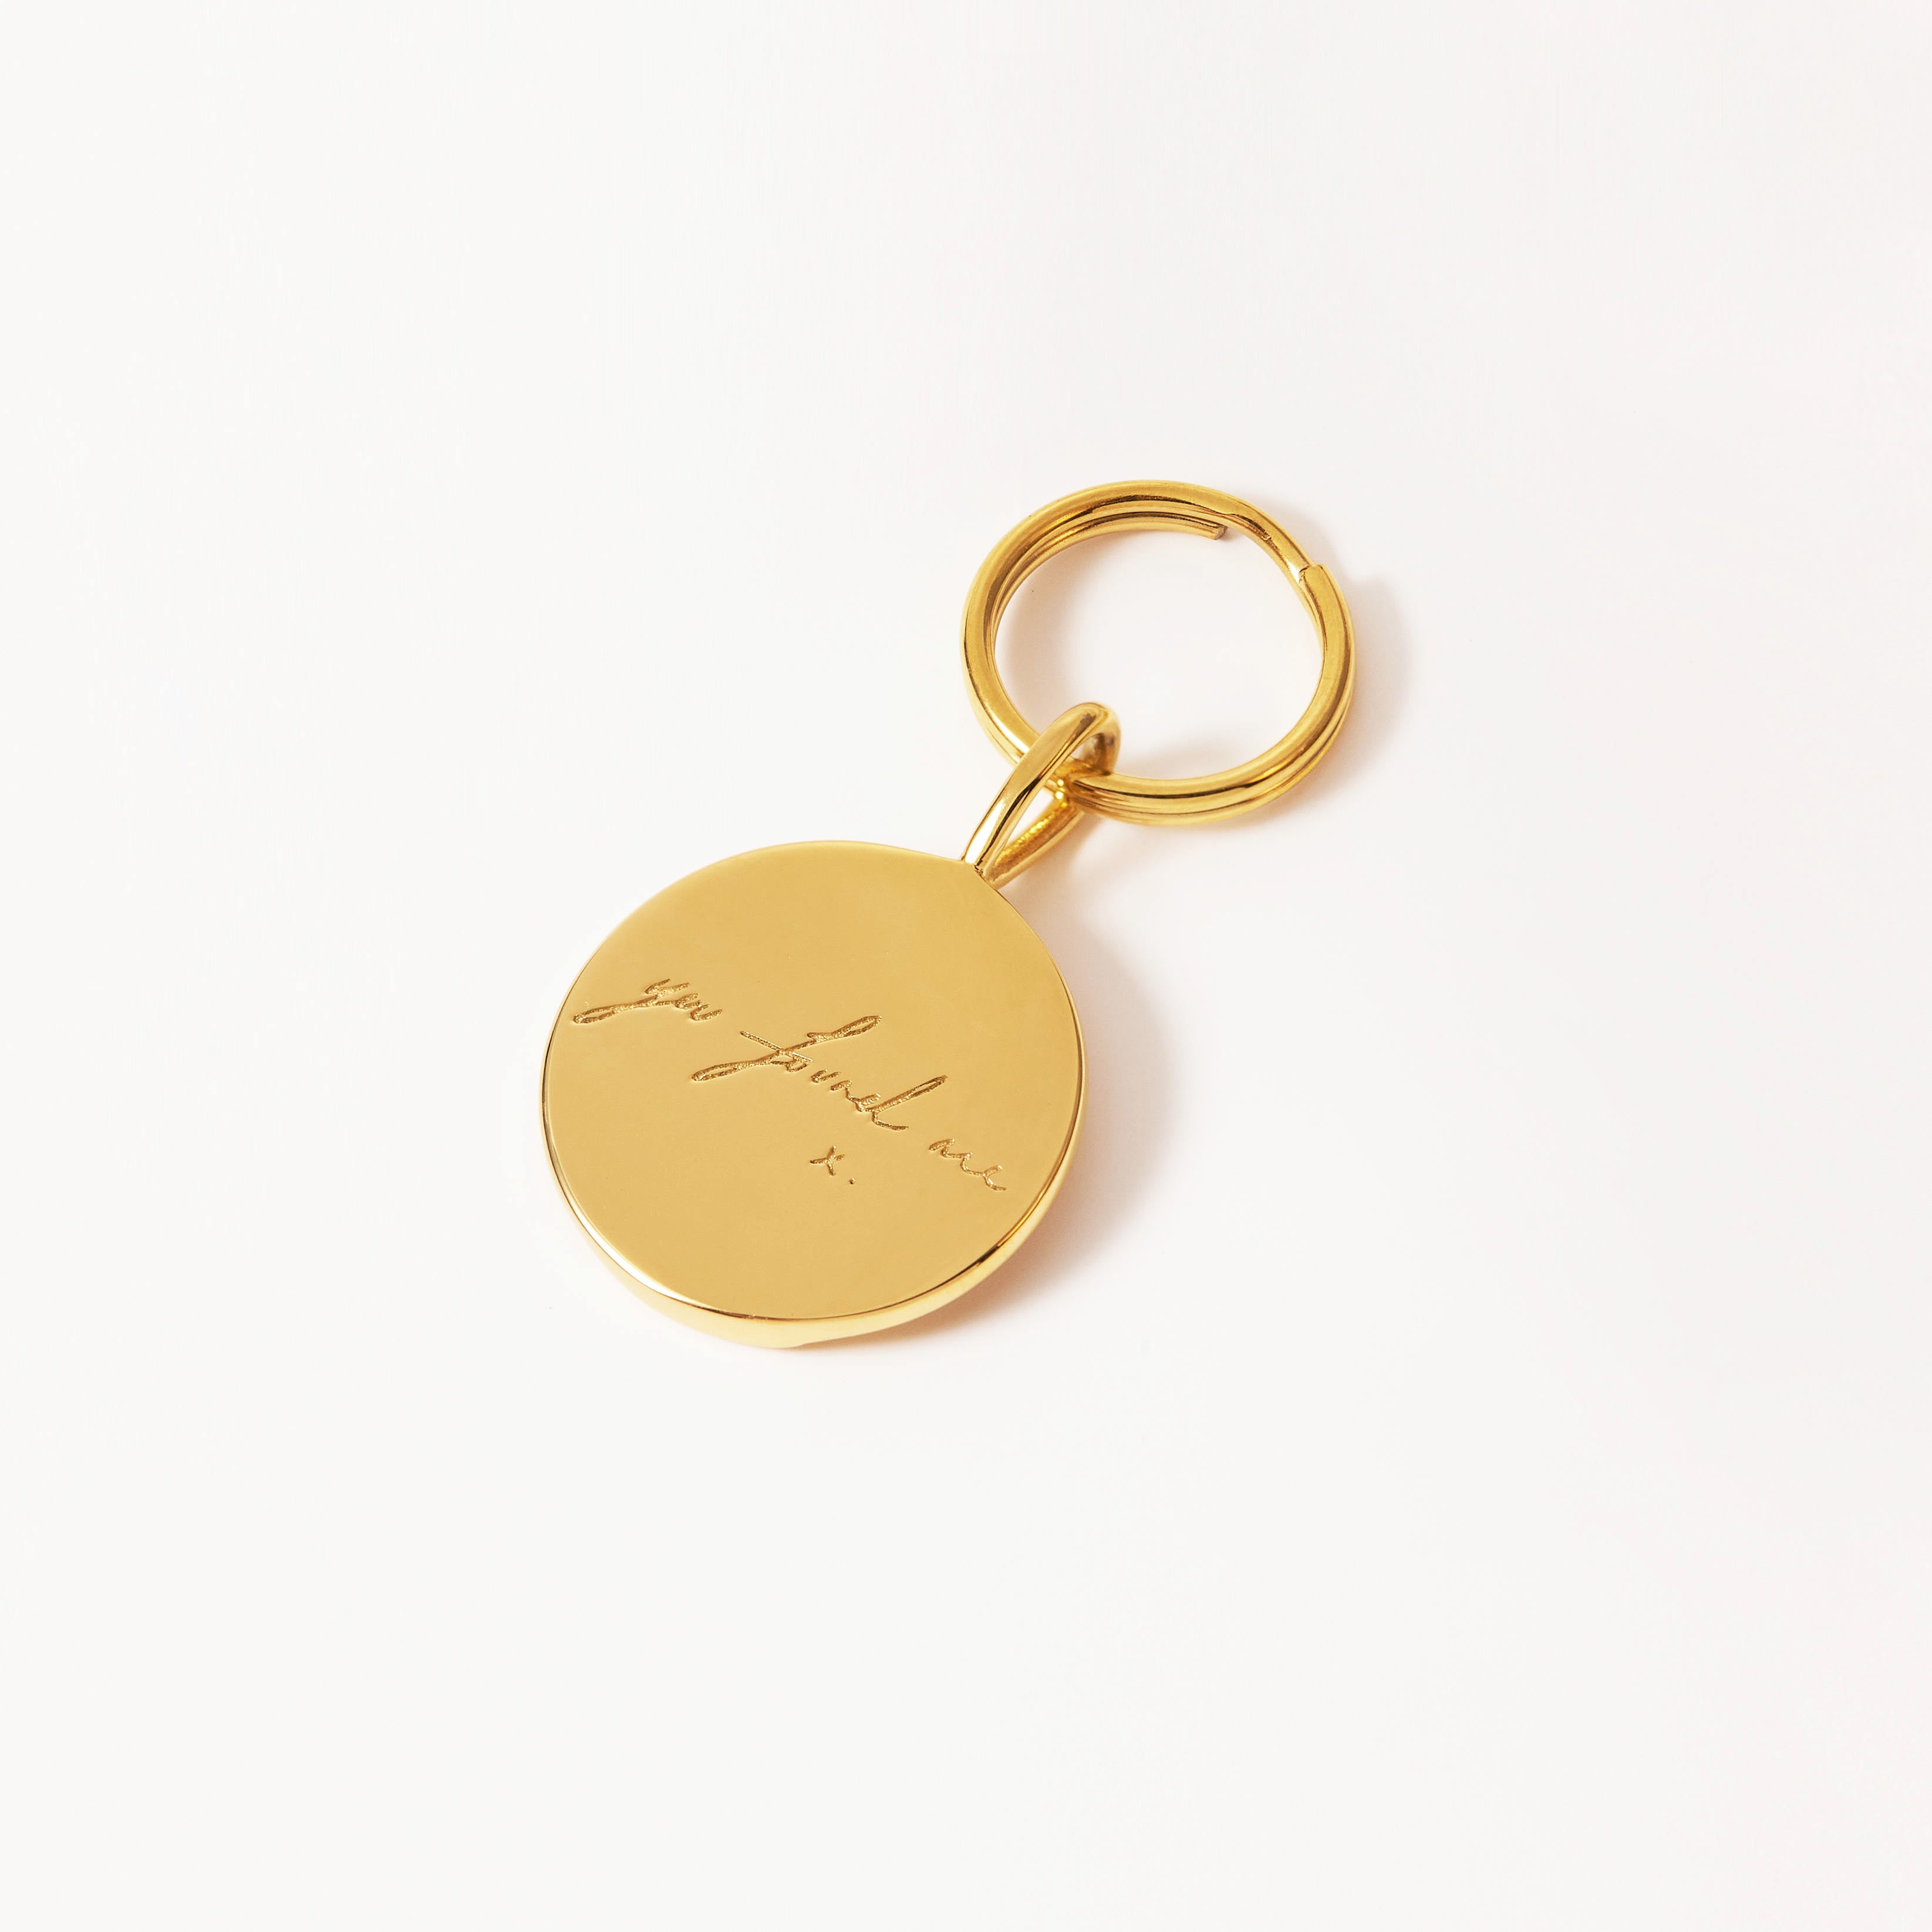 you found me. x matching pendant set for you & your dog. 18k Yellow Gold plated & Stainless steel.